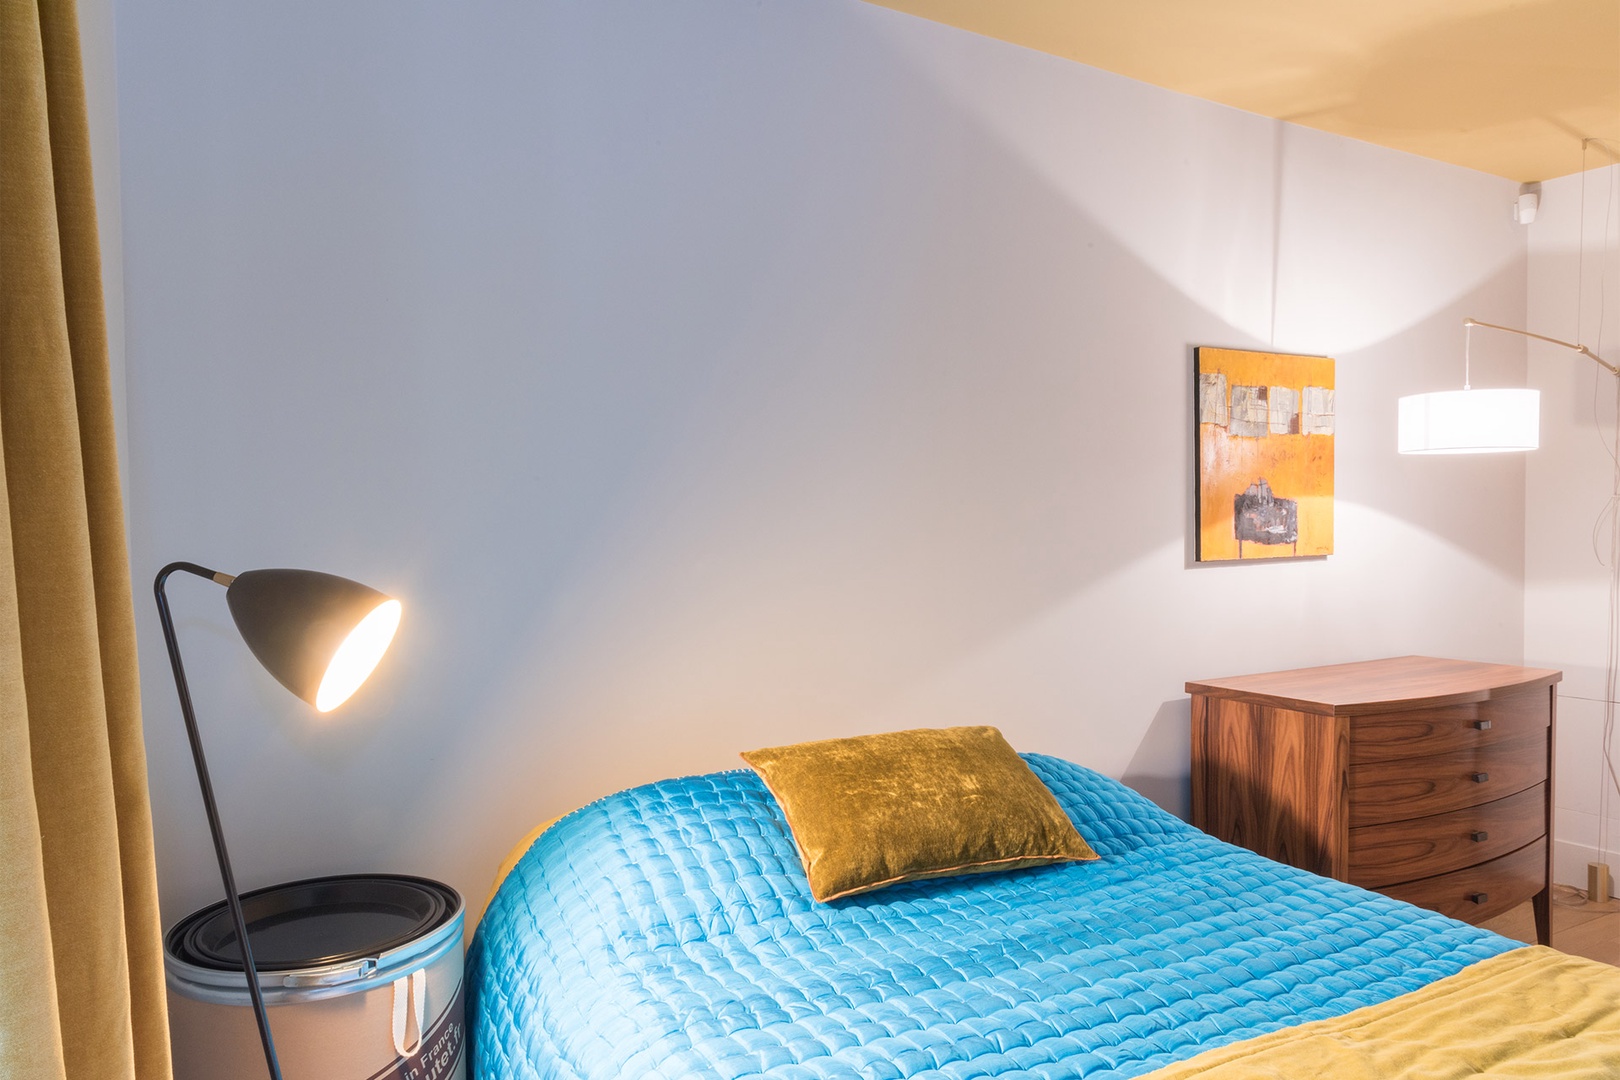 Bright contrasting colors in bedroom 3